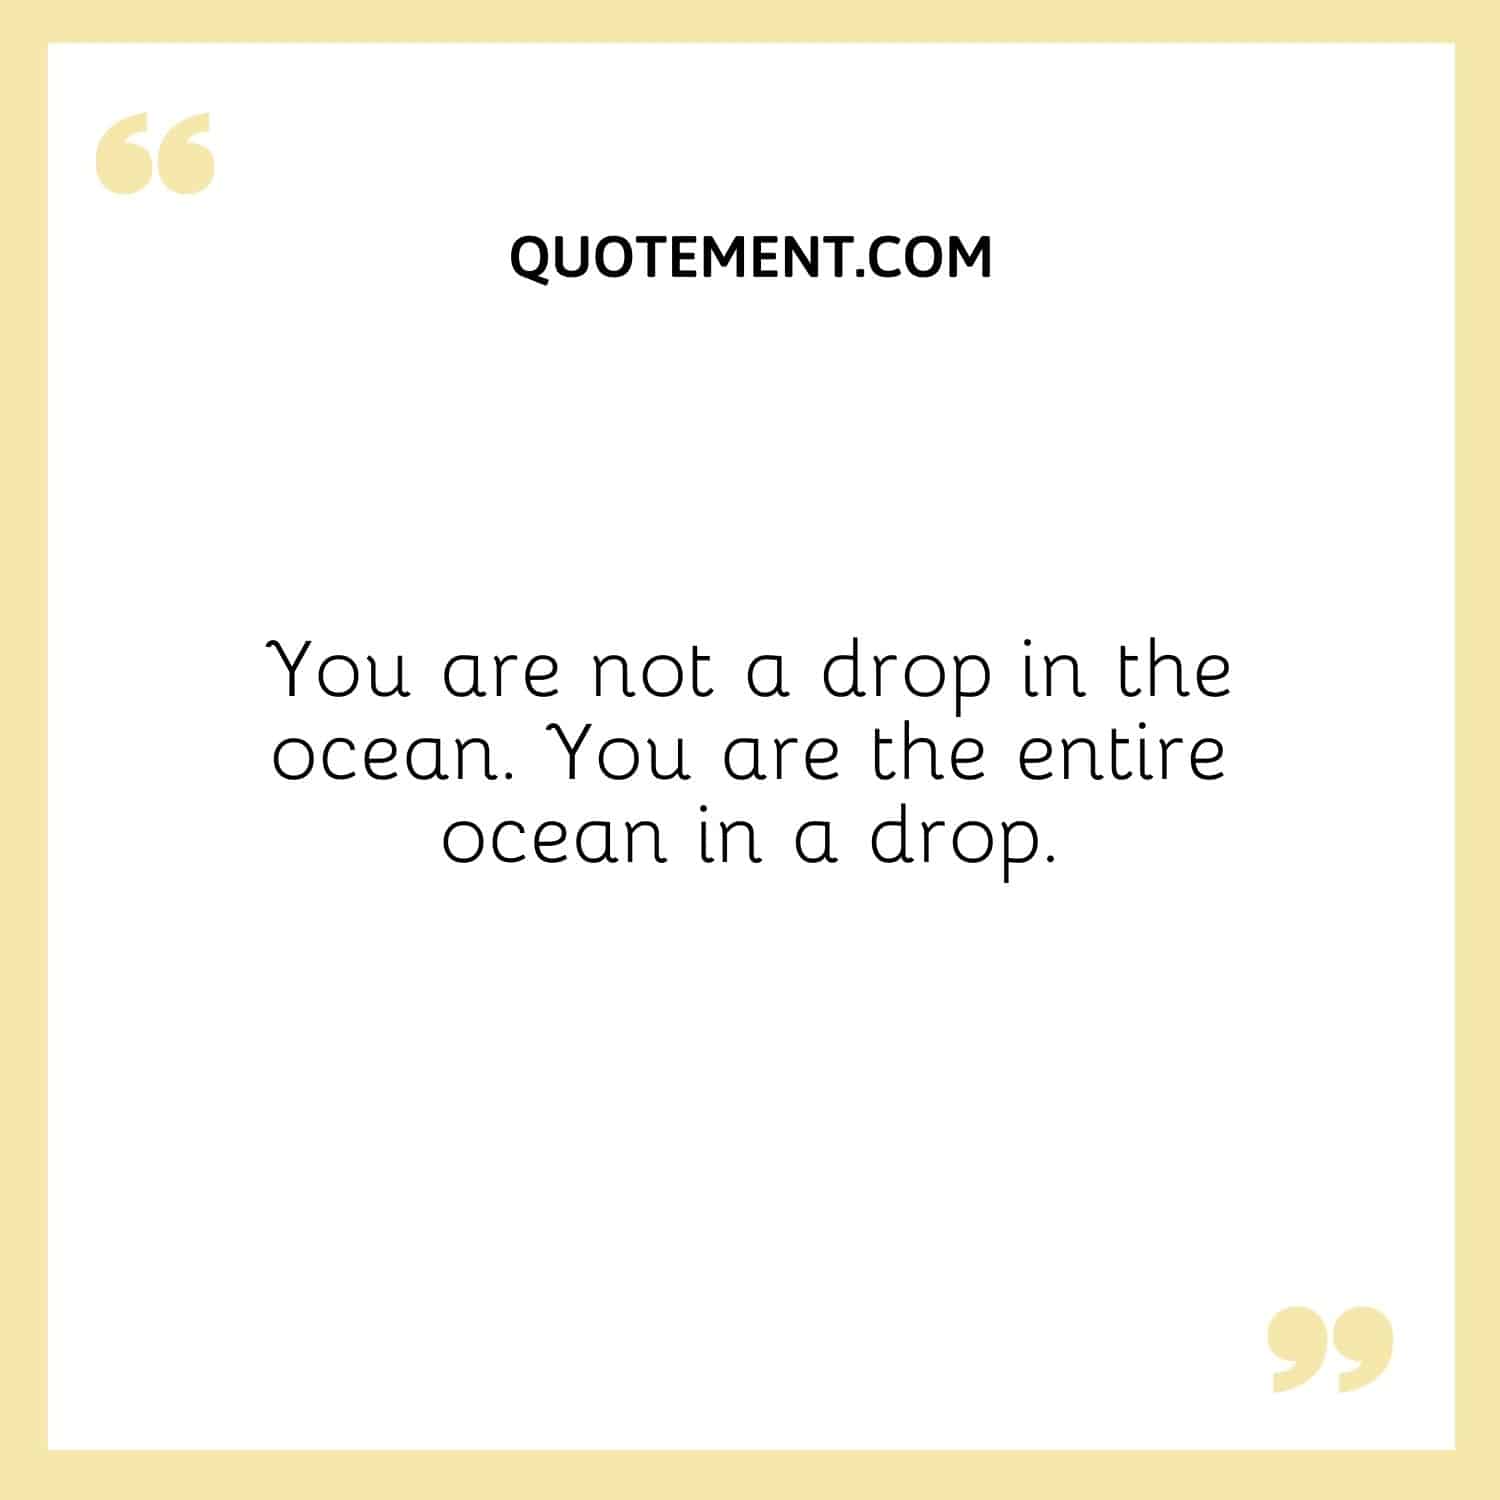 You are not a drop in the ocean.